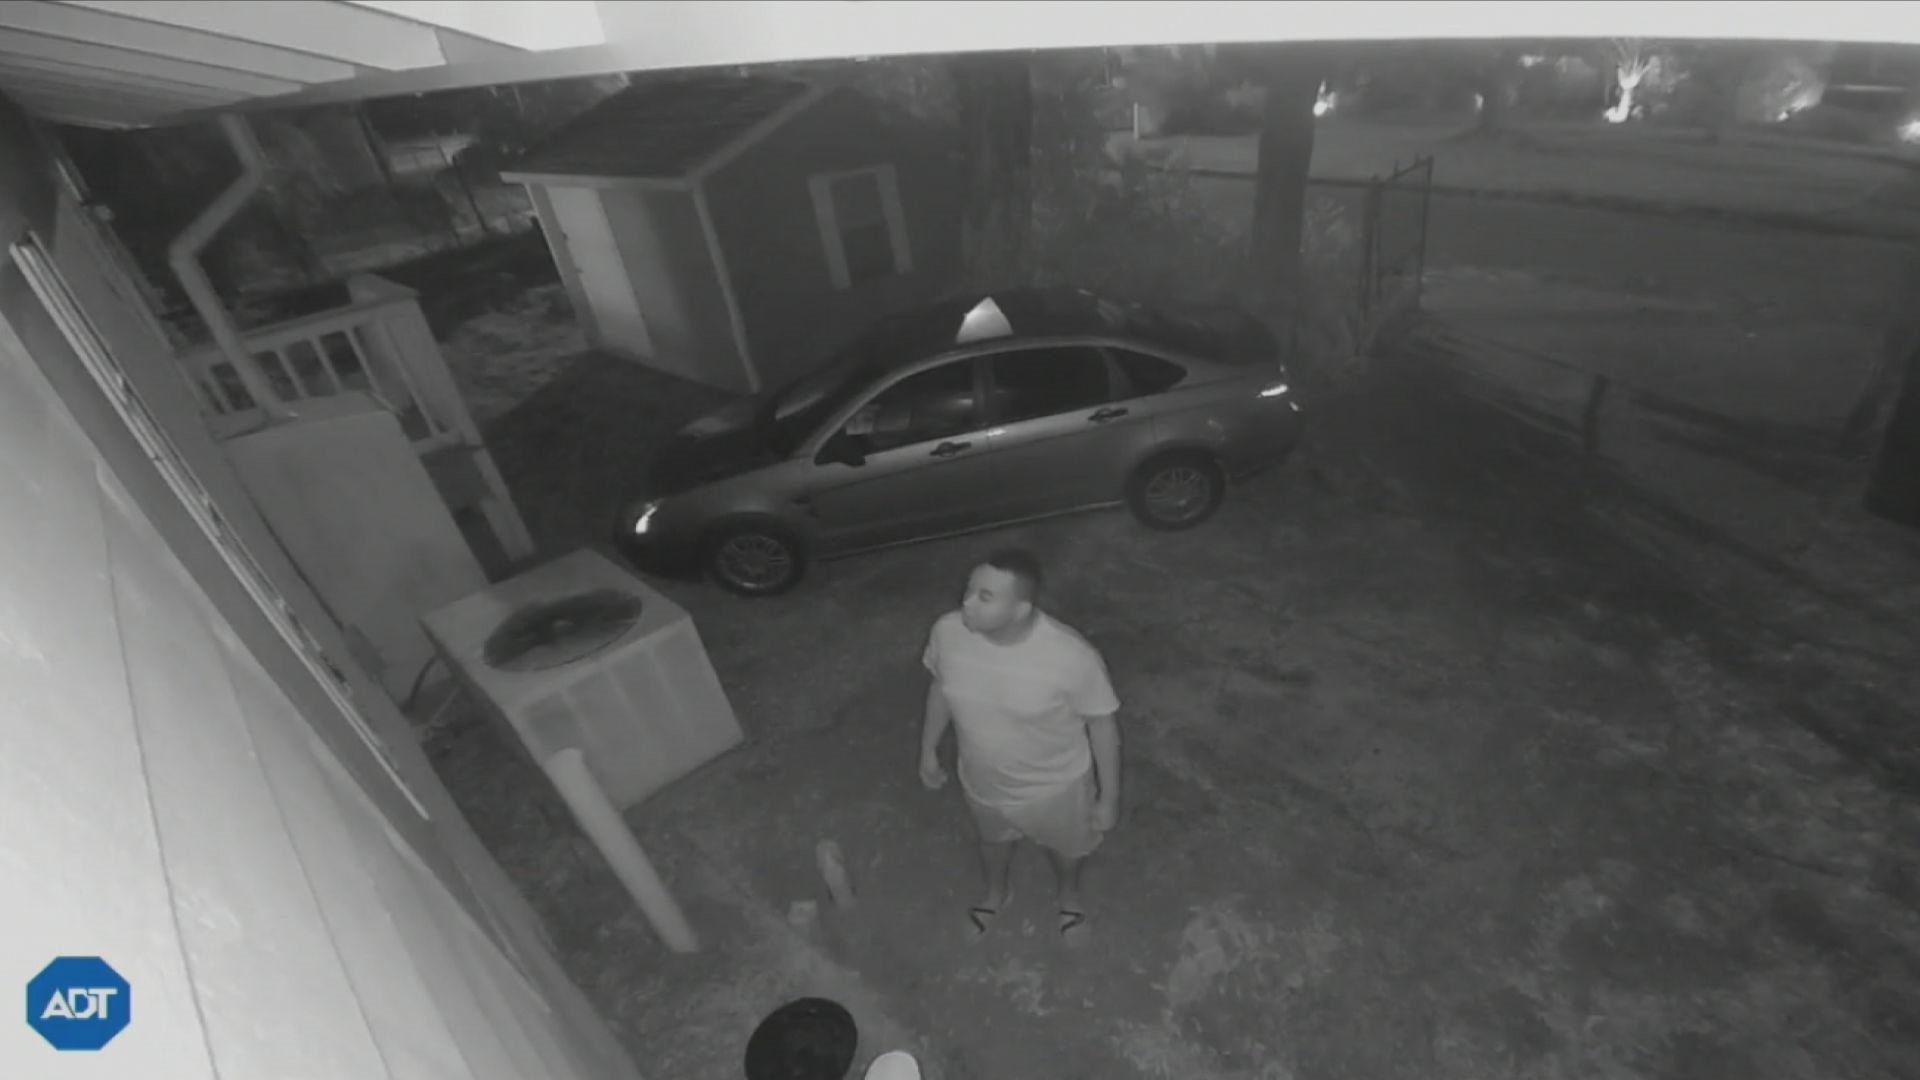 For weeks, Tampa police said a man was caught on surveillance video several times, peering into the windows of an unsuspecting woman.